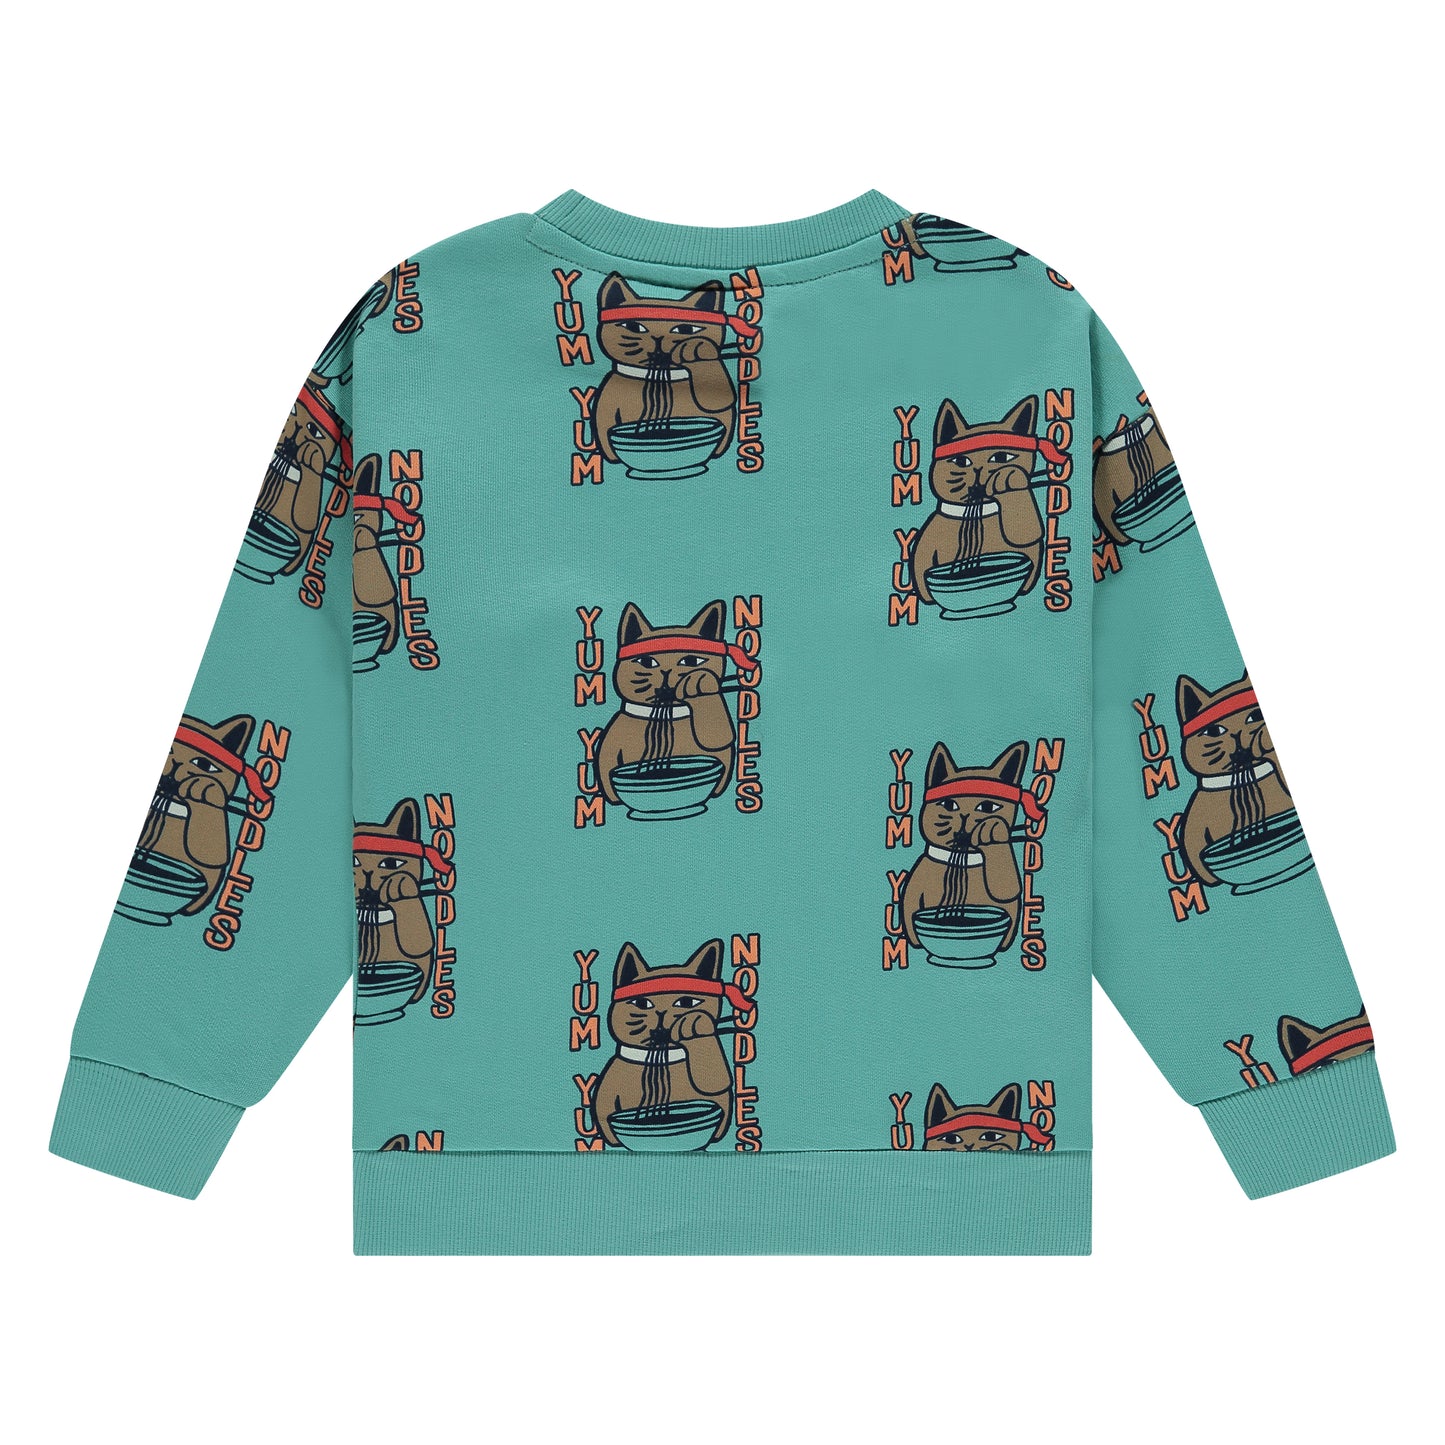 Stains & Stories Sweatshirt - Turquoise